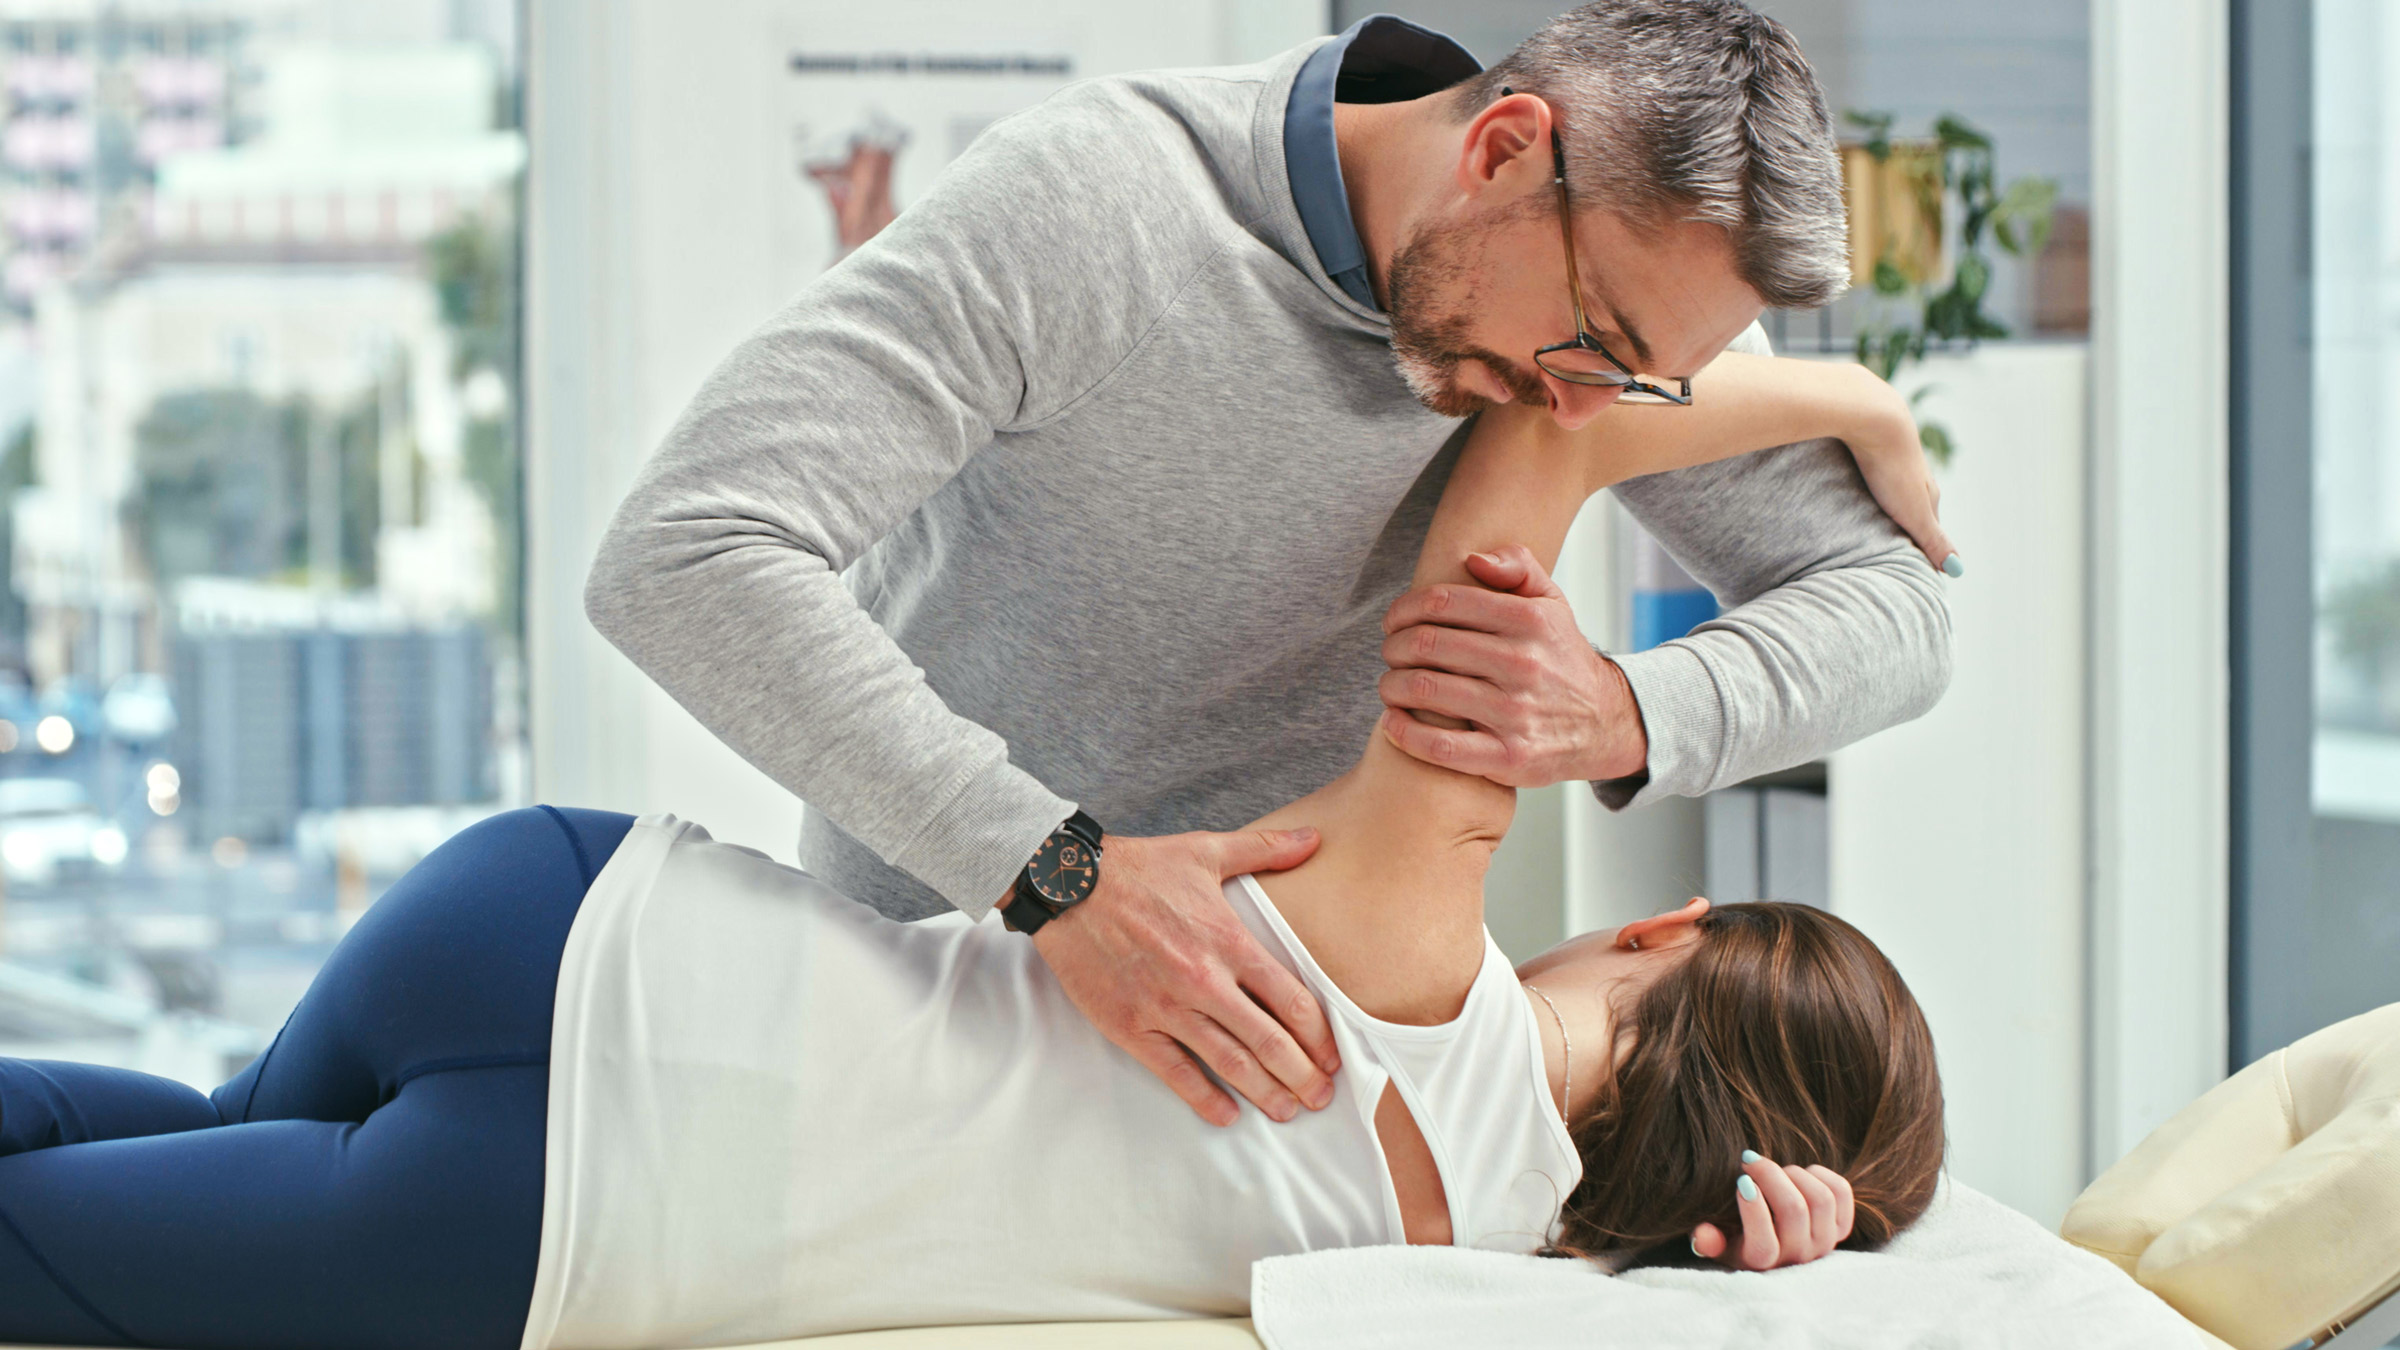 The Medical Minute: Sitting too long? Five remedies for back, neck pain -  Penn State Health News